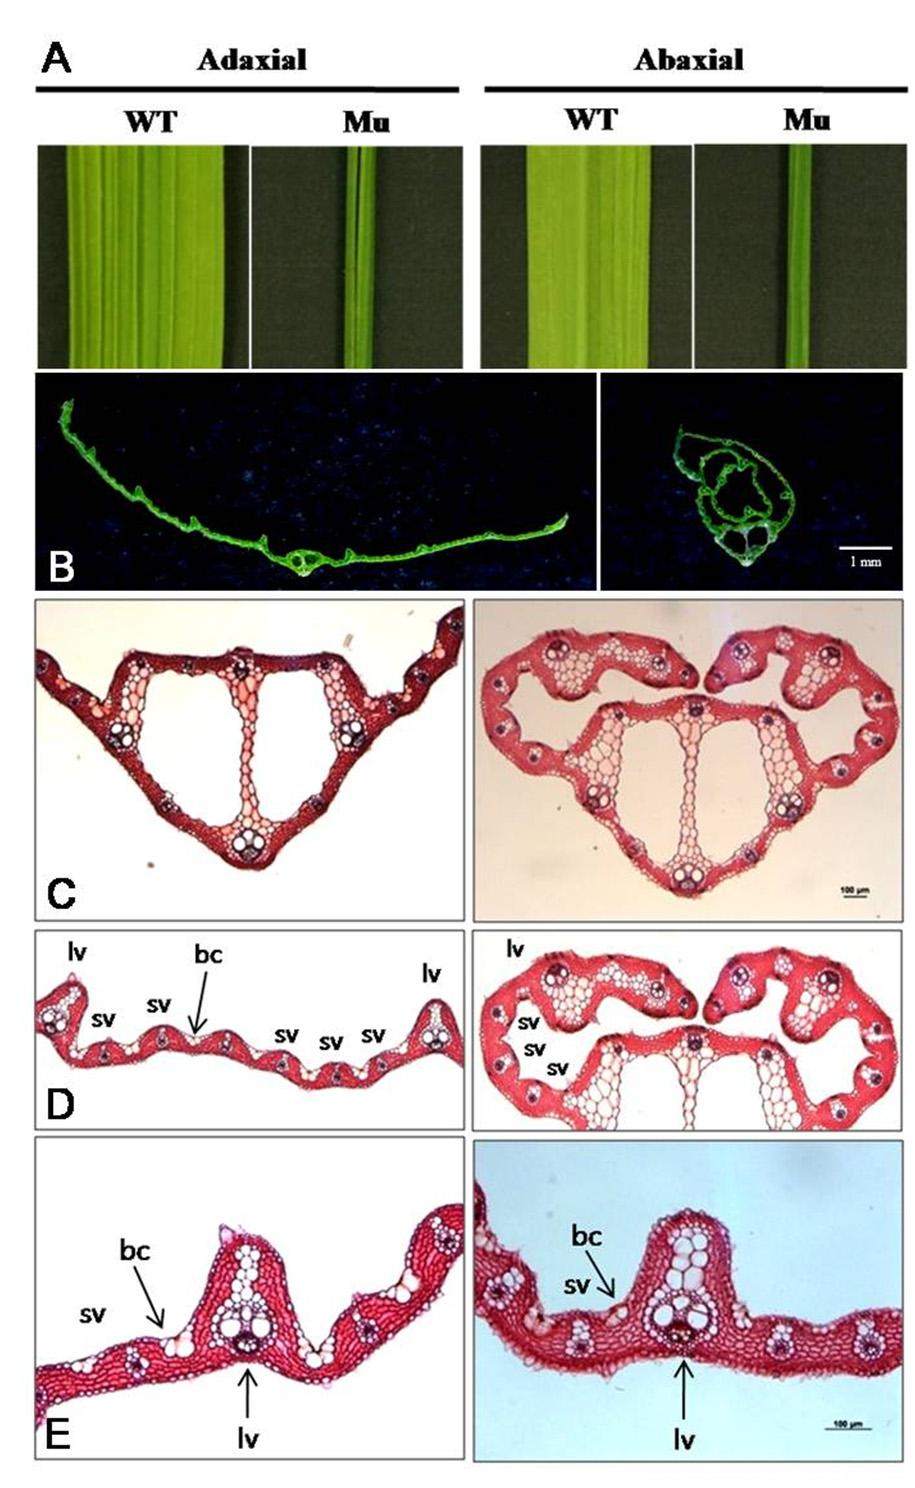 184 Kor. J. Breed. Sci. 43(4), (2011) Fig. 3. Comparison of leaf microstructure of wild-type and rolled leaf mutant. A. Part of a flag leaf in wild-type (left) and mutant (right) B.